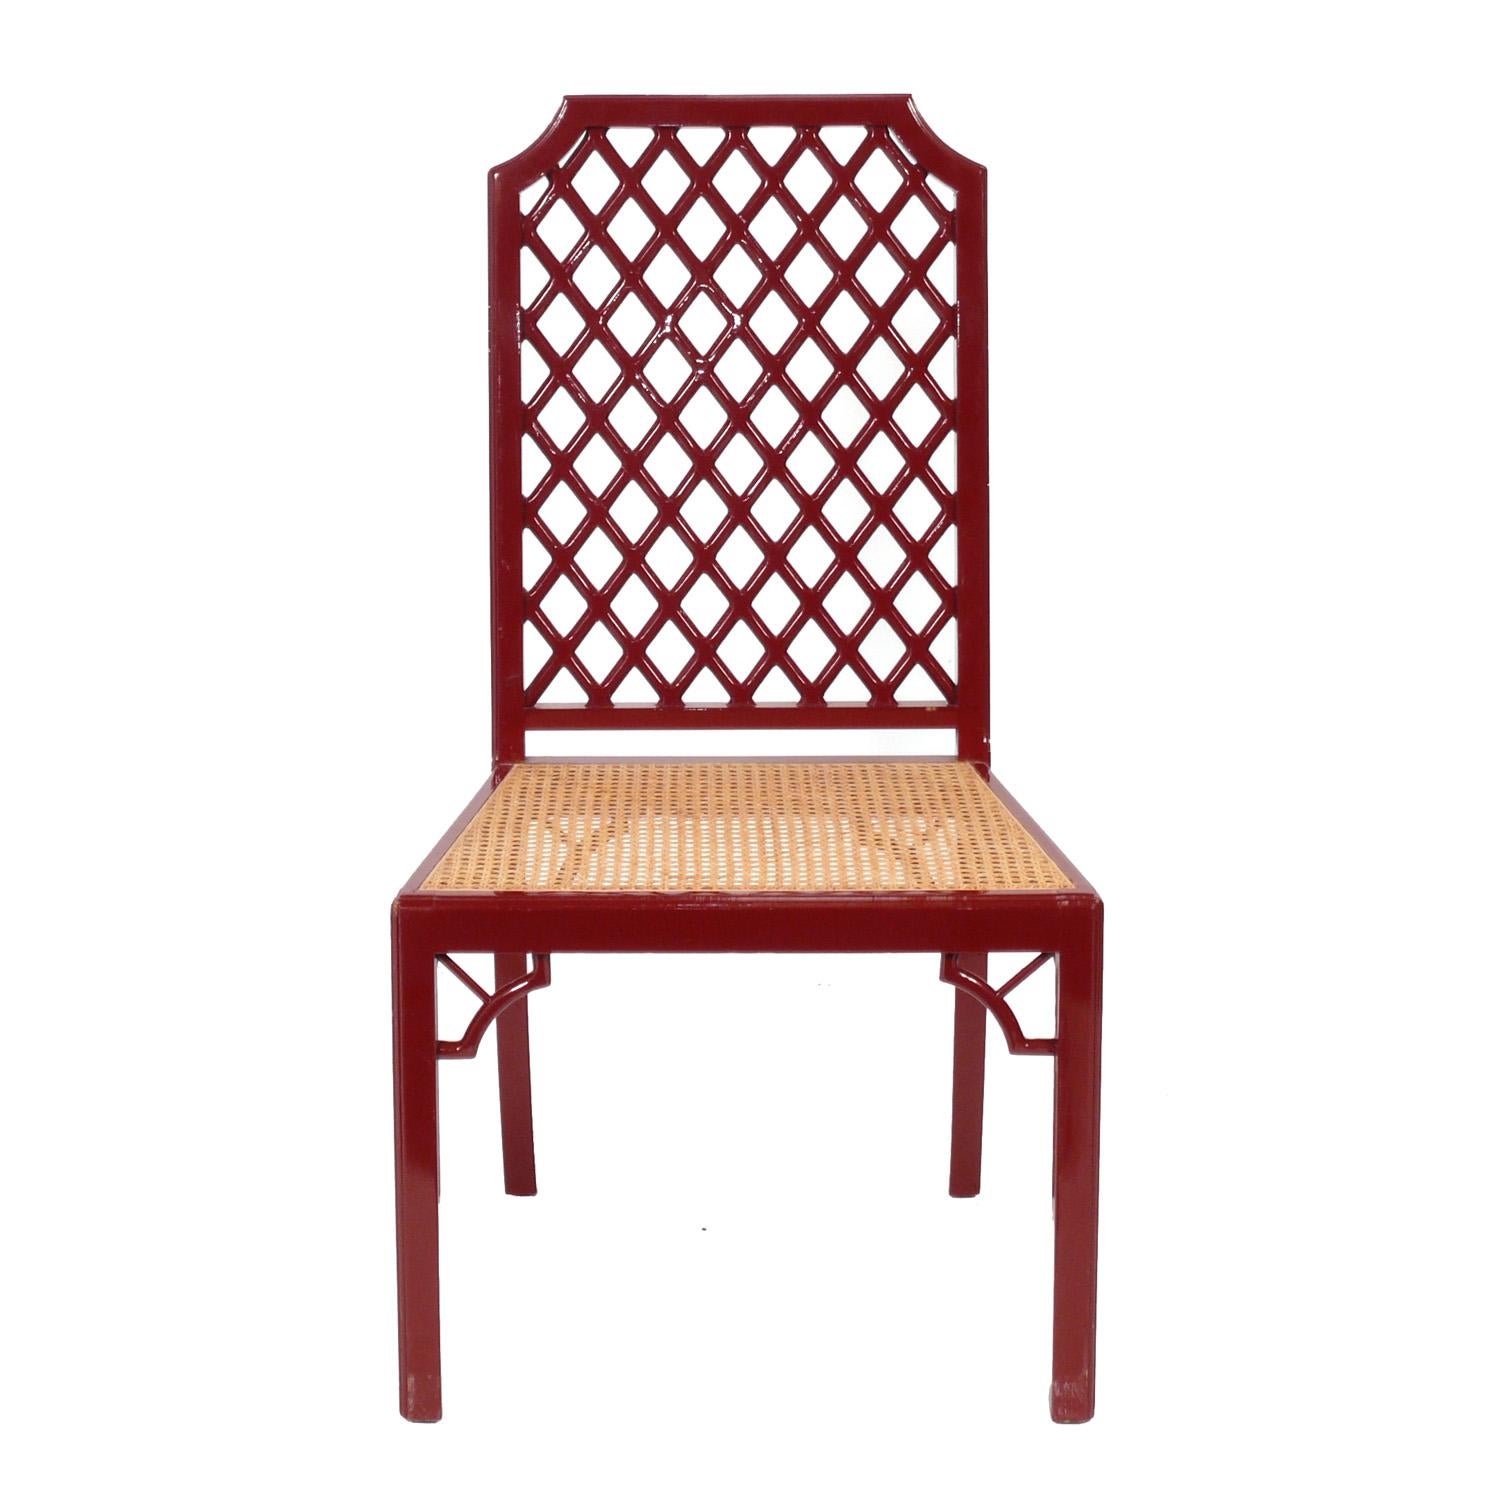 Chinese Red Lacquer Lattice Dining Chairs, Italian, circa 1960s. They retain their original Chinese Red color lacquer finish and caned seats. We can reupholster the cushions in your fabric at no additional charge. Simply send us 5 yards of your